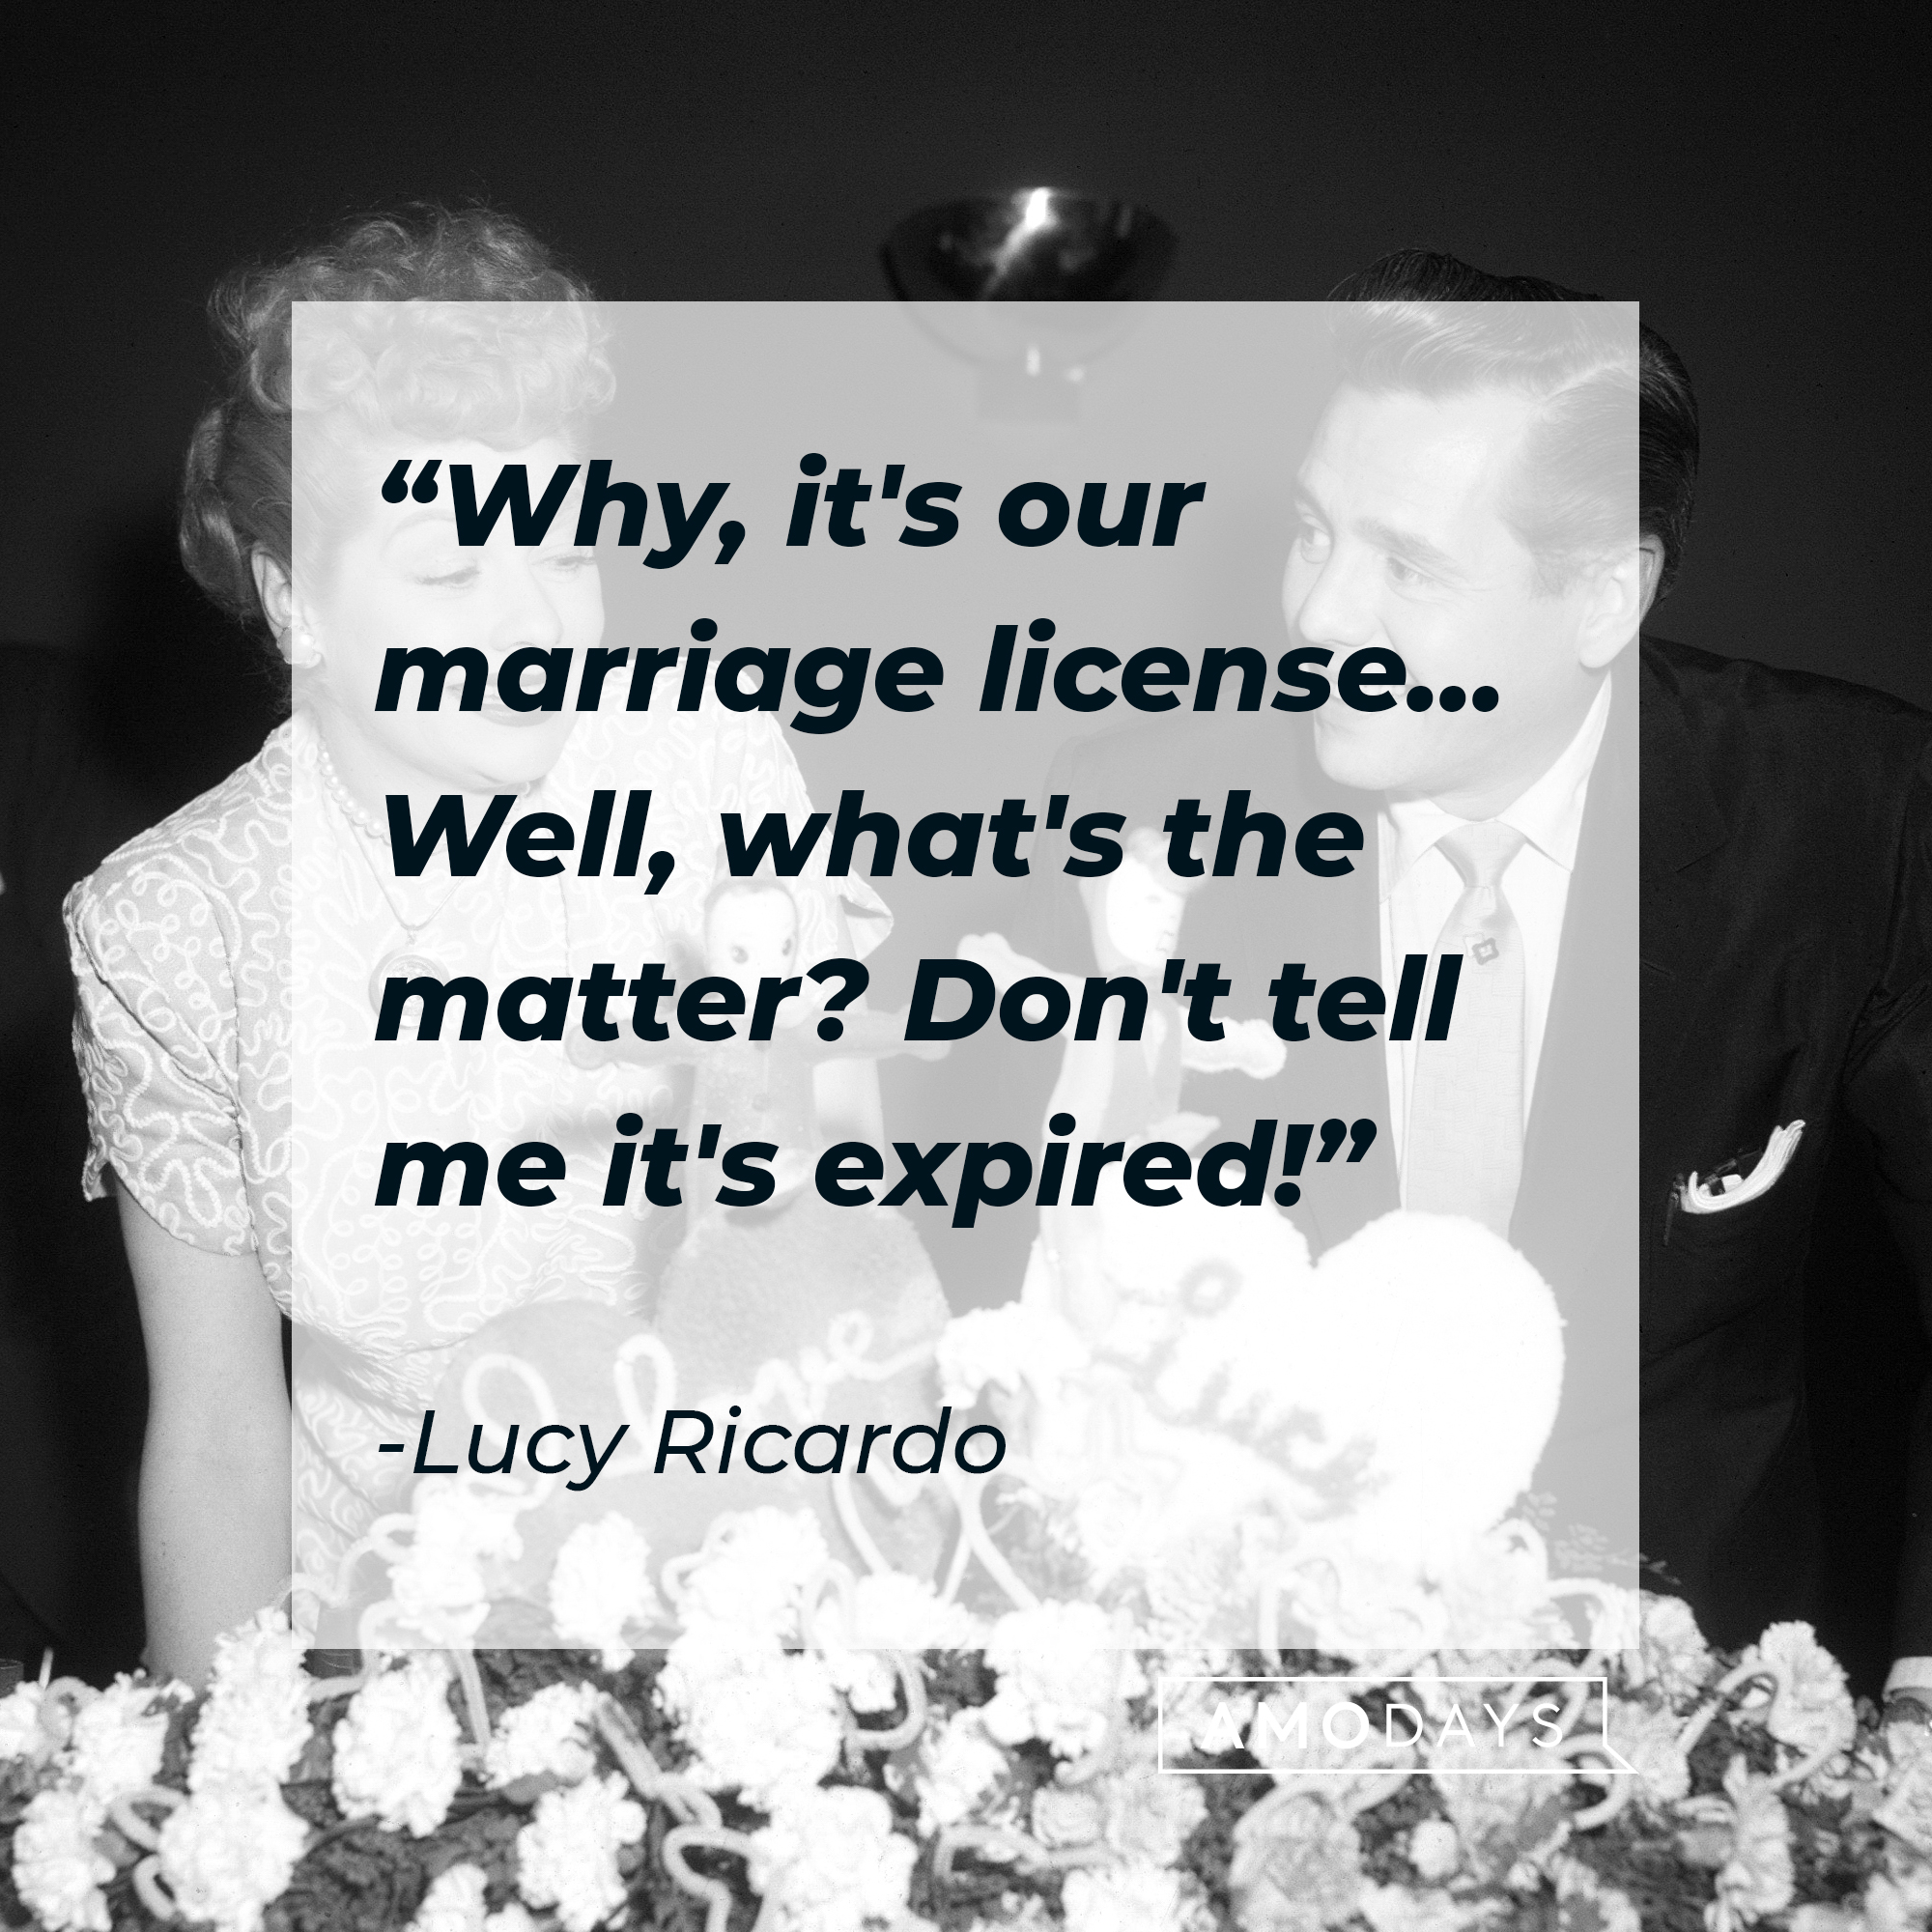 Lucy Ricardo's quote: "Why, it's our marriage license... Well, what's the matter? Don't tell me it's expired!" | Source: Getty Images